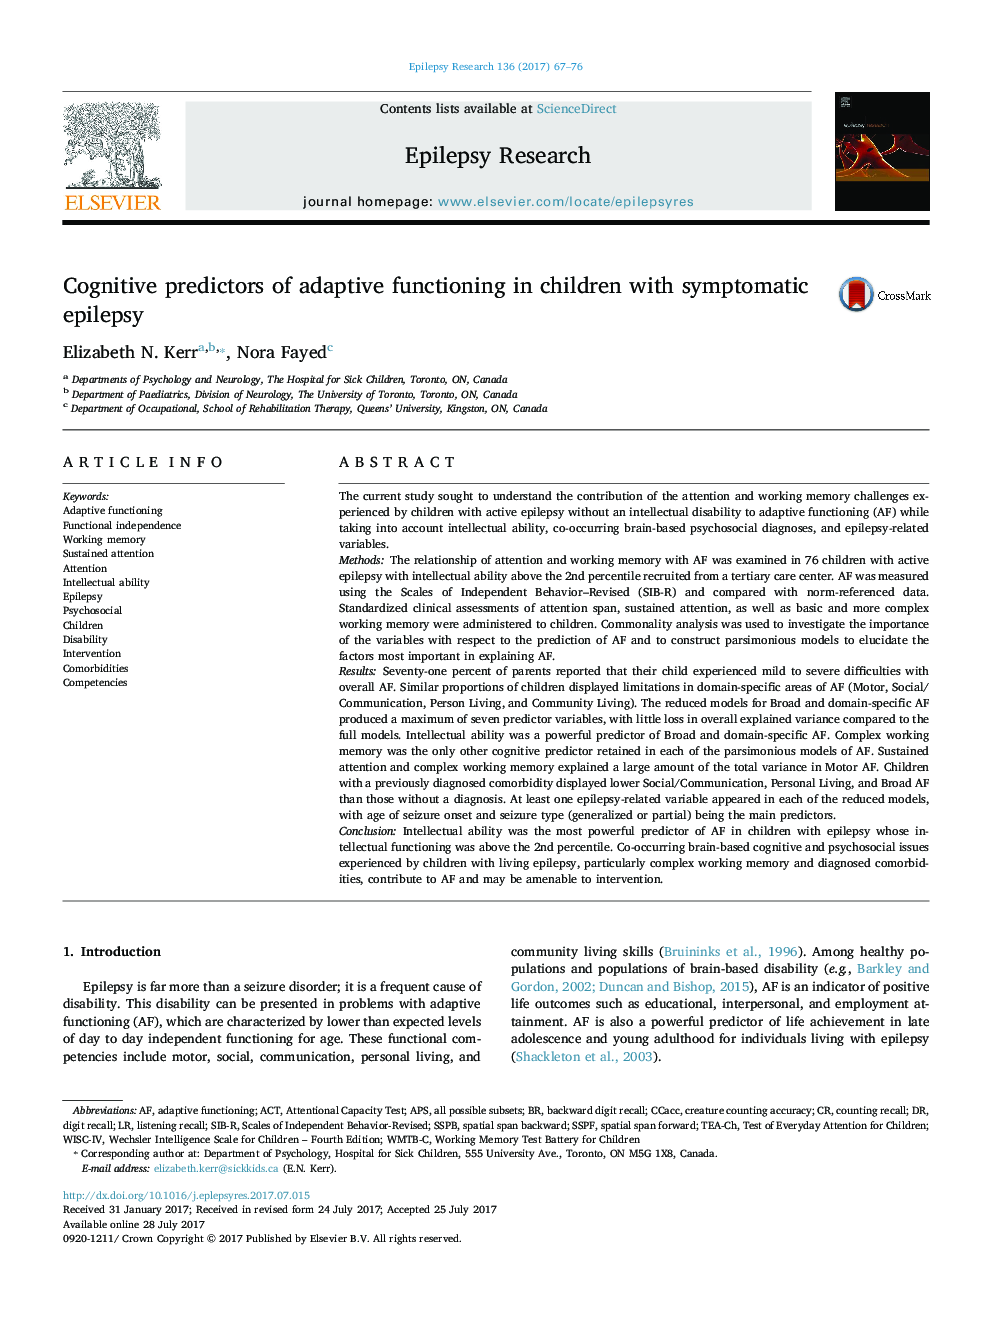 Cognitive predictors of adaptive functioning in children with symptomatic epilepsy